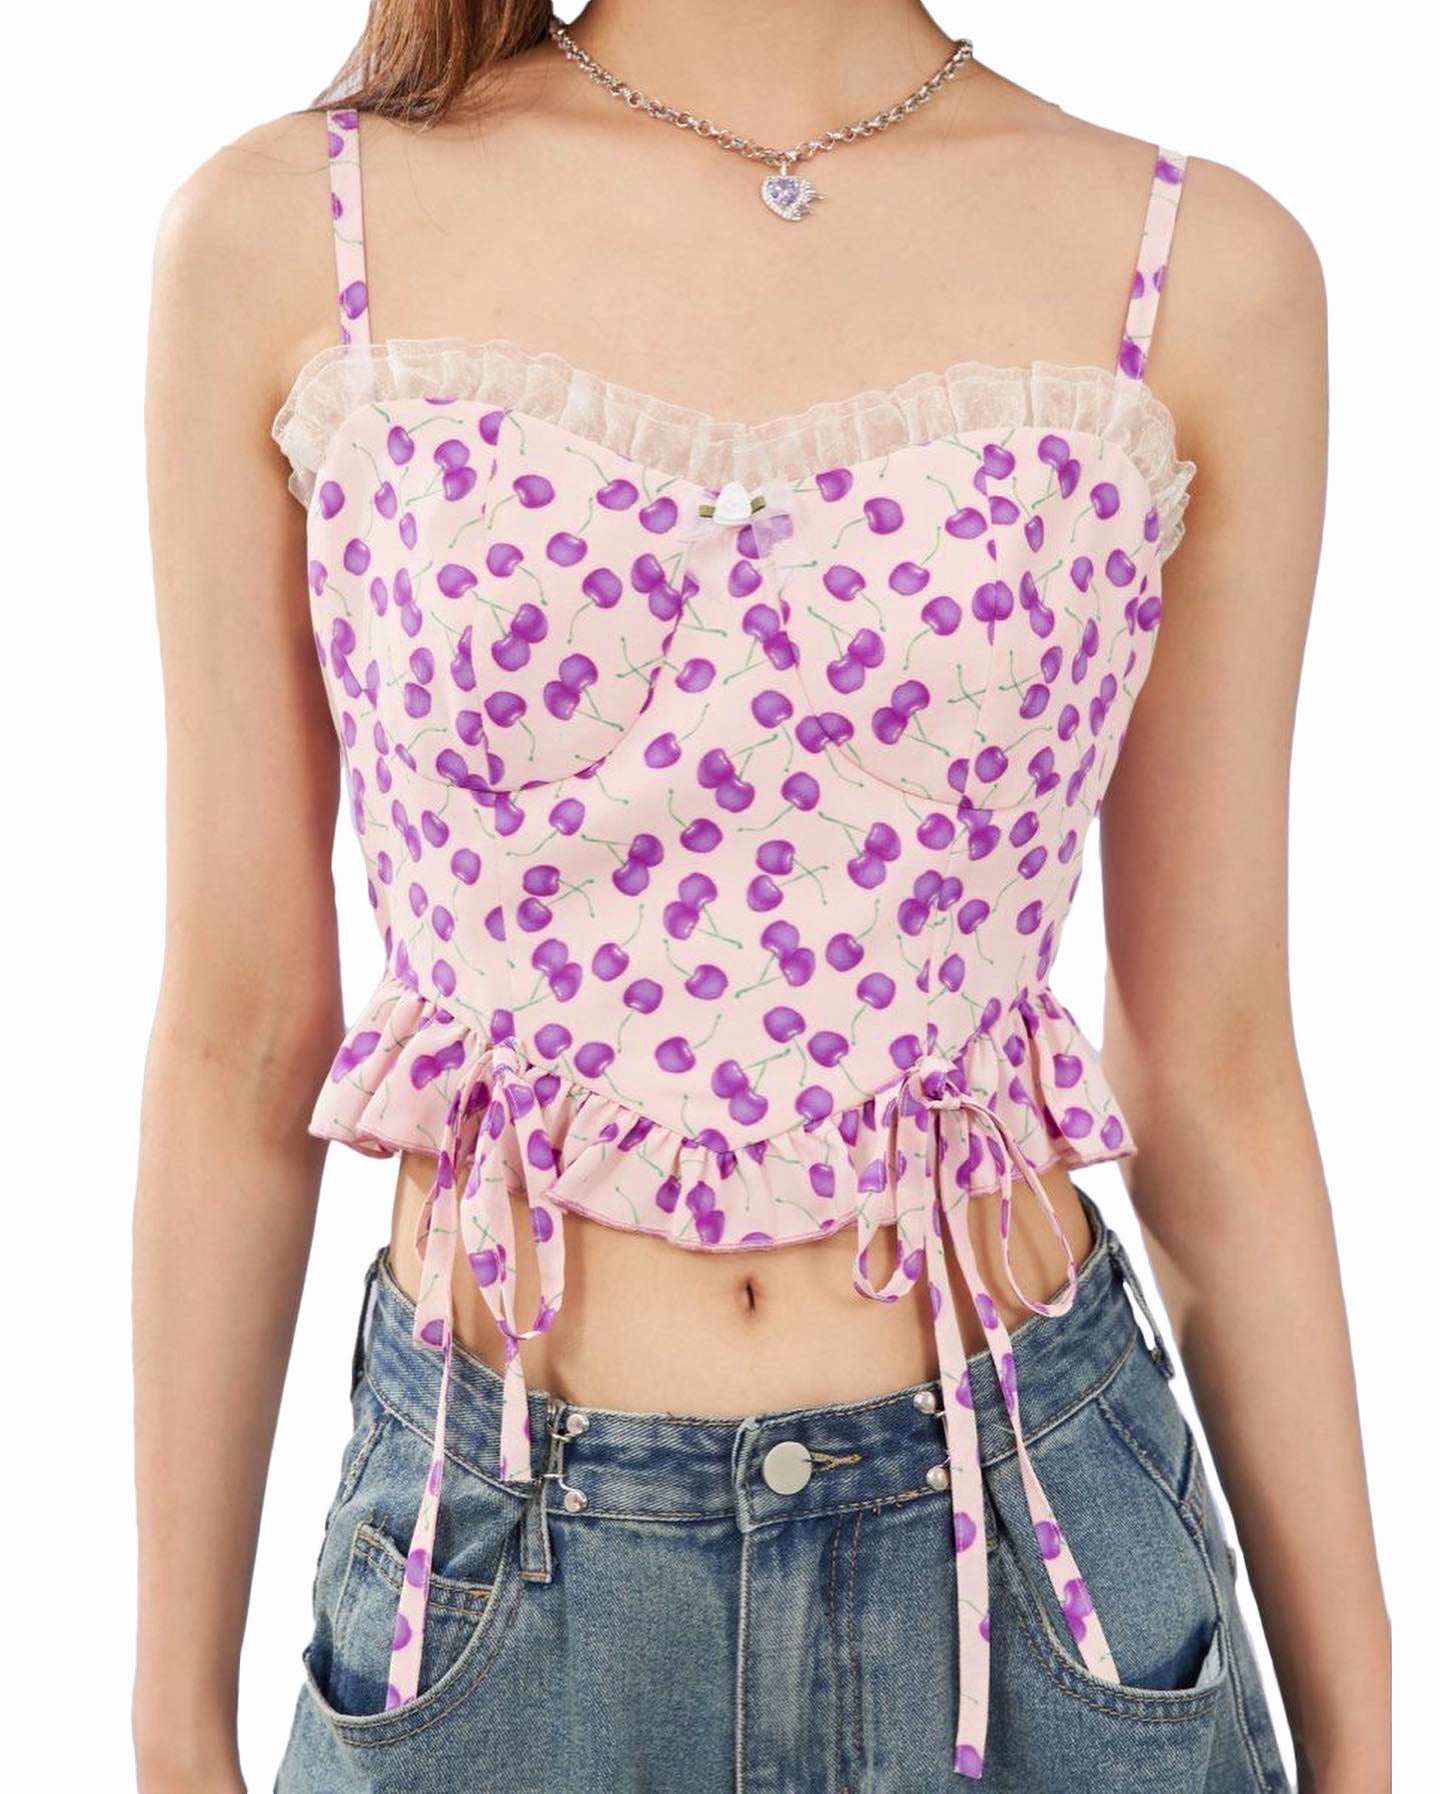 Fancy Printed Camisole Top